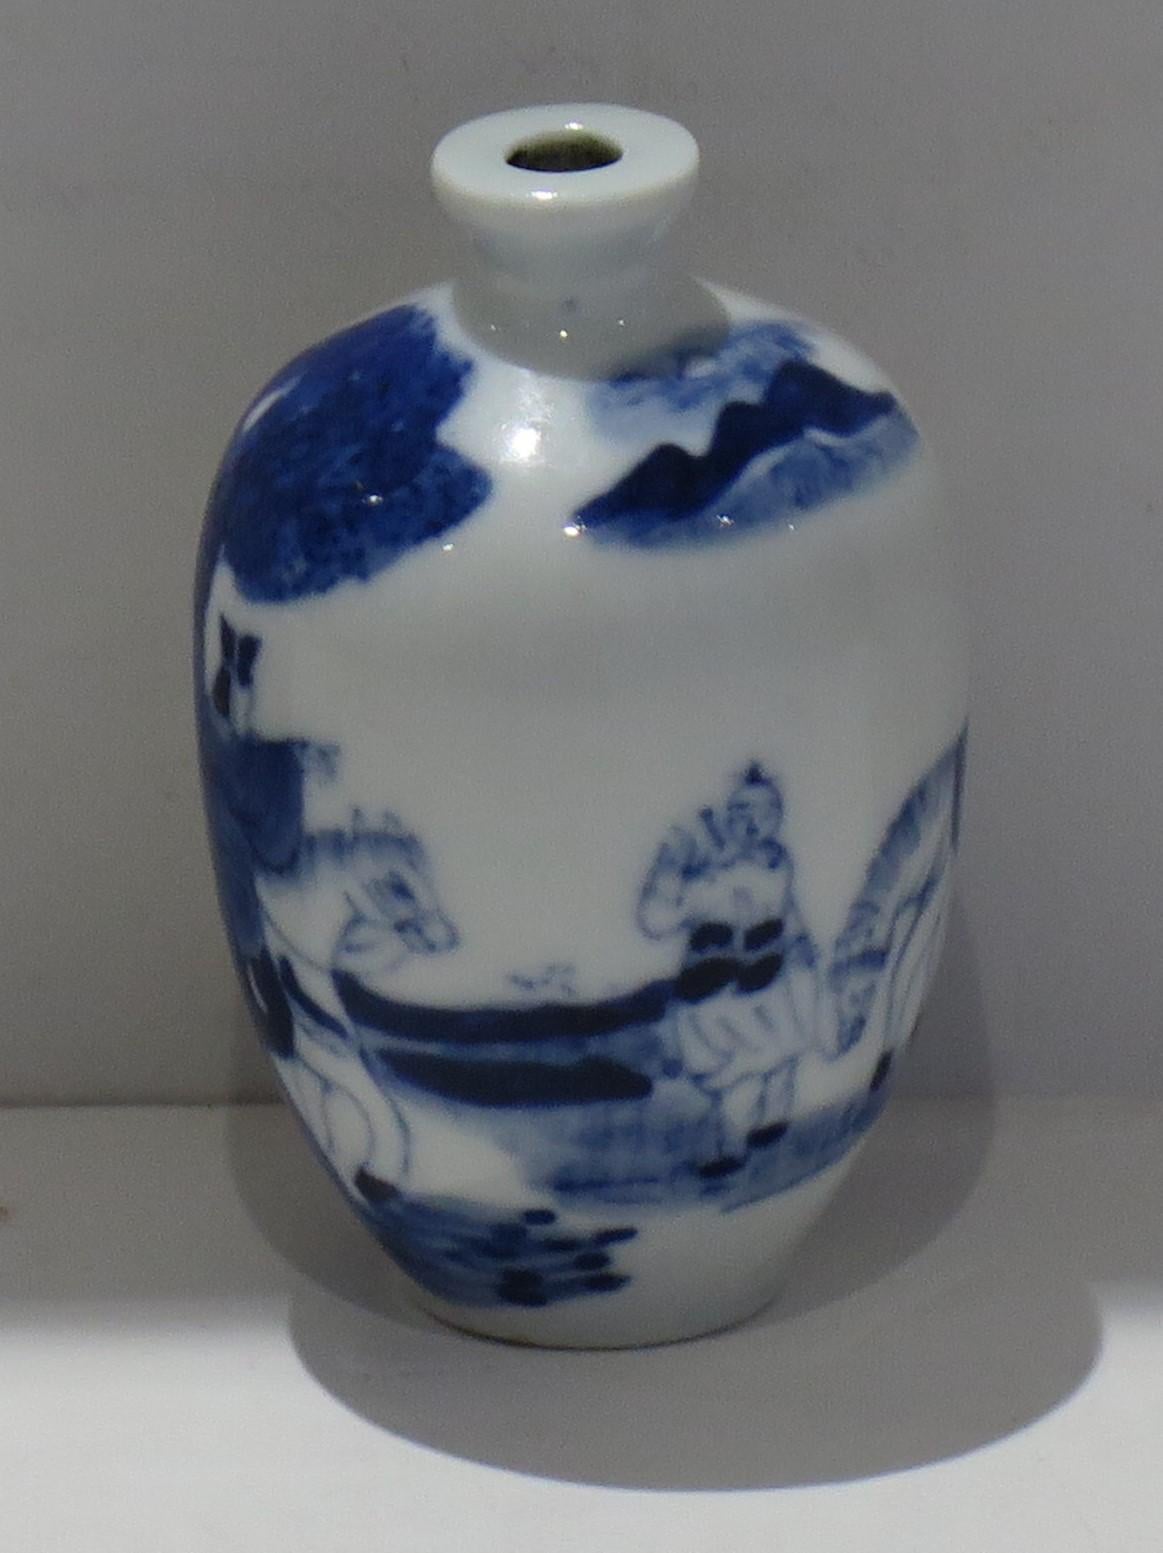 This is a very good quality Chinese snuff bottle, made from porcelain and finely hand painted in cobalt blue, dating to the mid 19th century, Qing, Xianfeng period circa 1850s.

This piece is well potted with a baluster / bottle shape and a short